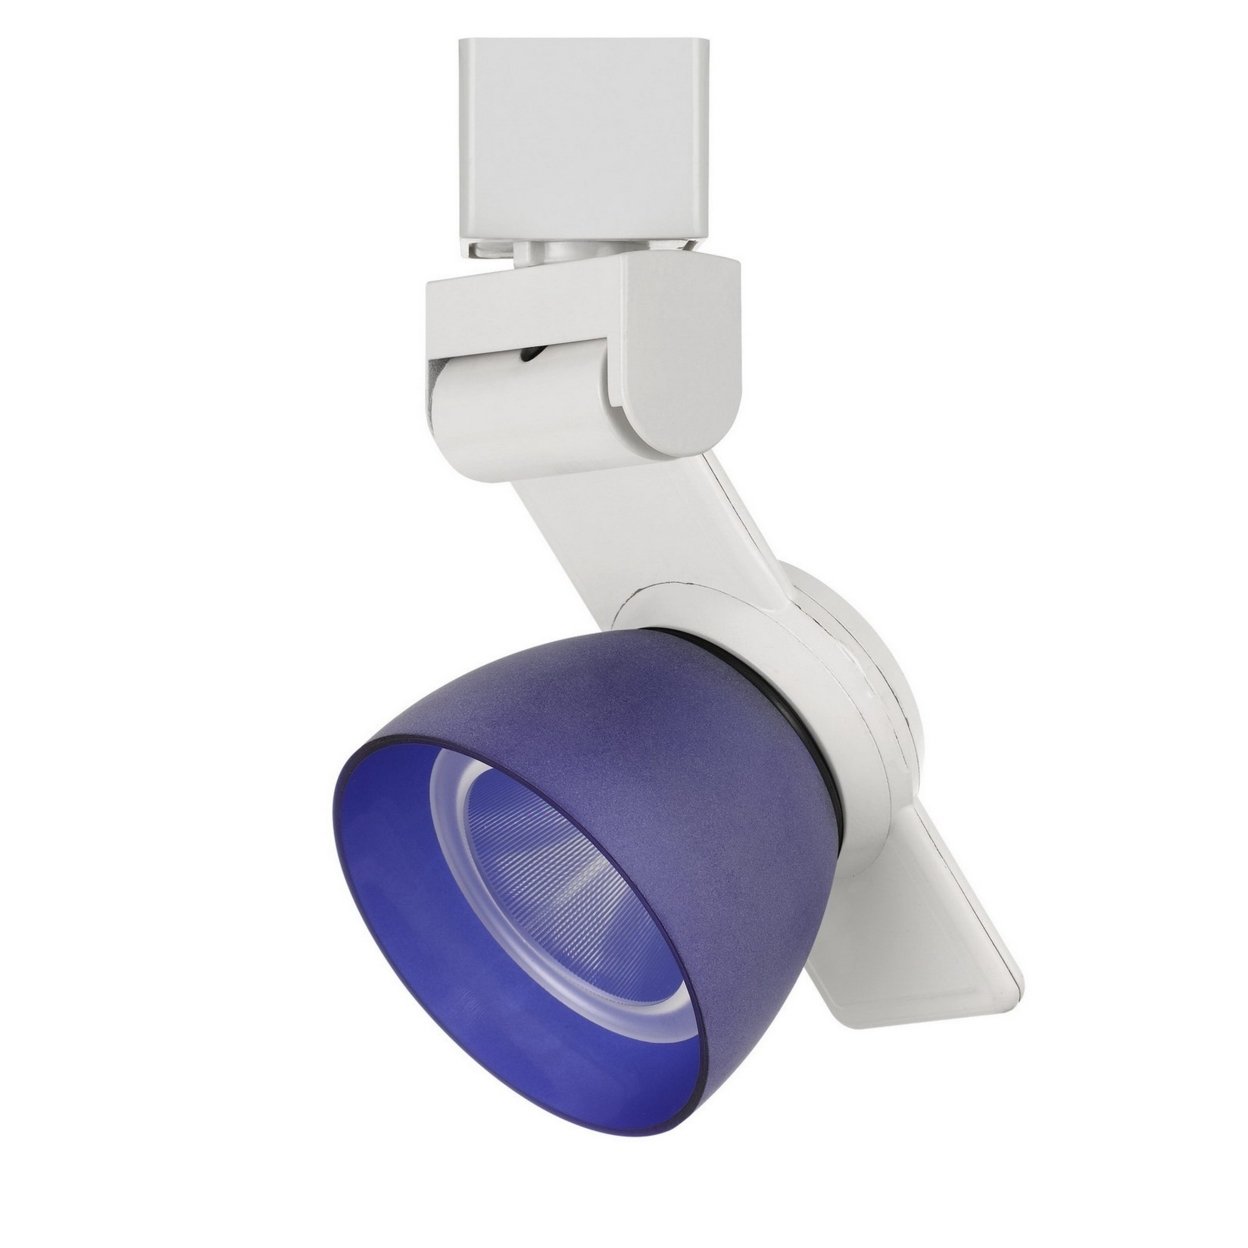 12W Integrated Metal And Polycarbonate LED Track Fixture, White And Blue- Saltoro Sherpi